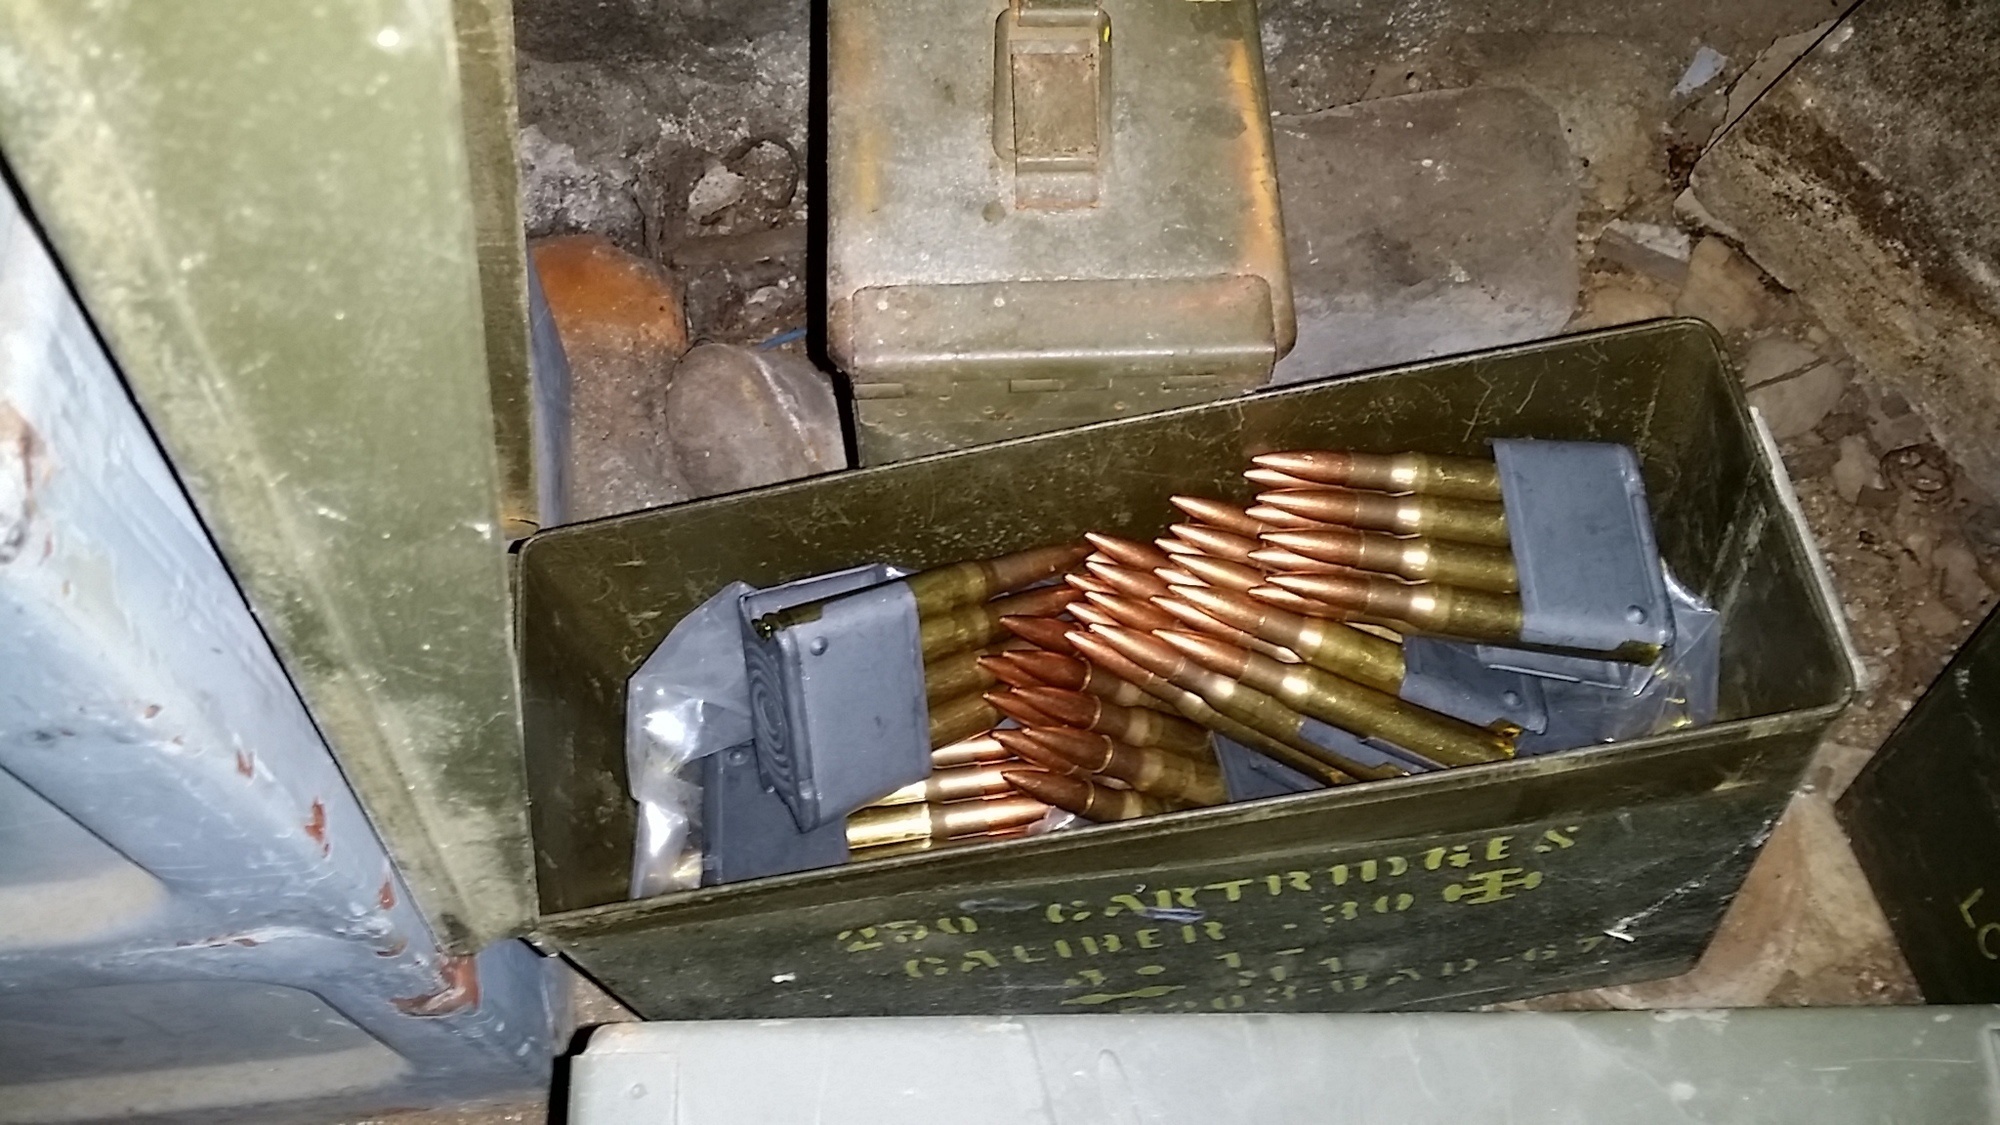 In a secret room of one person's home, a box with ammunition, a defused grenade, and thousands of pennies.